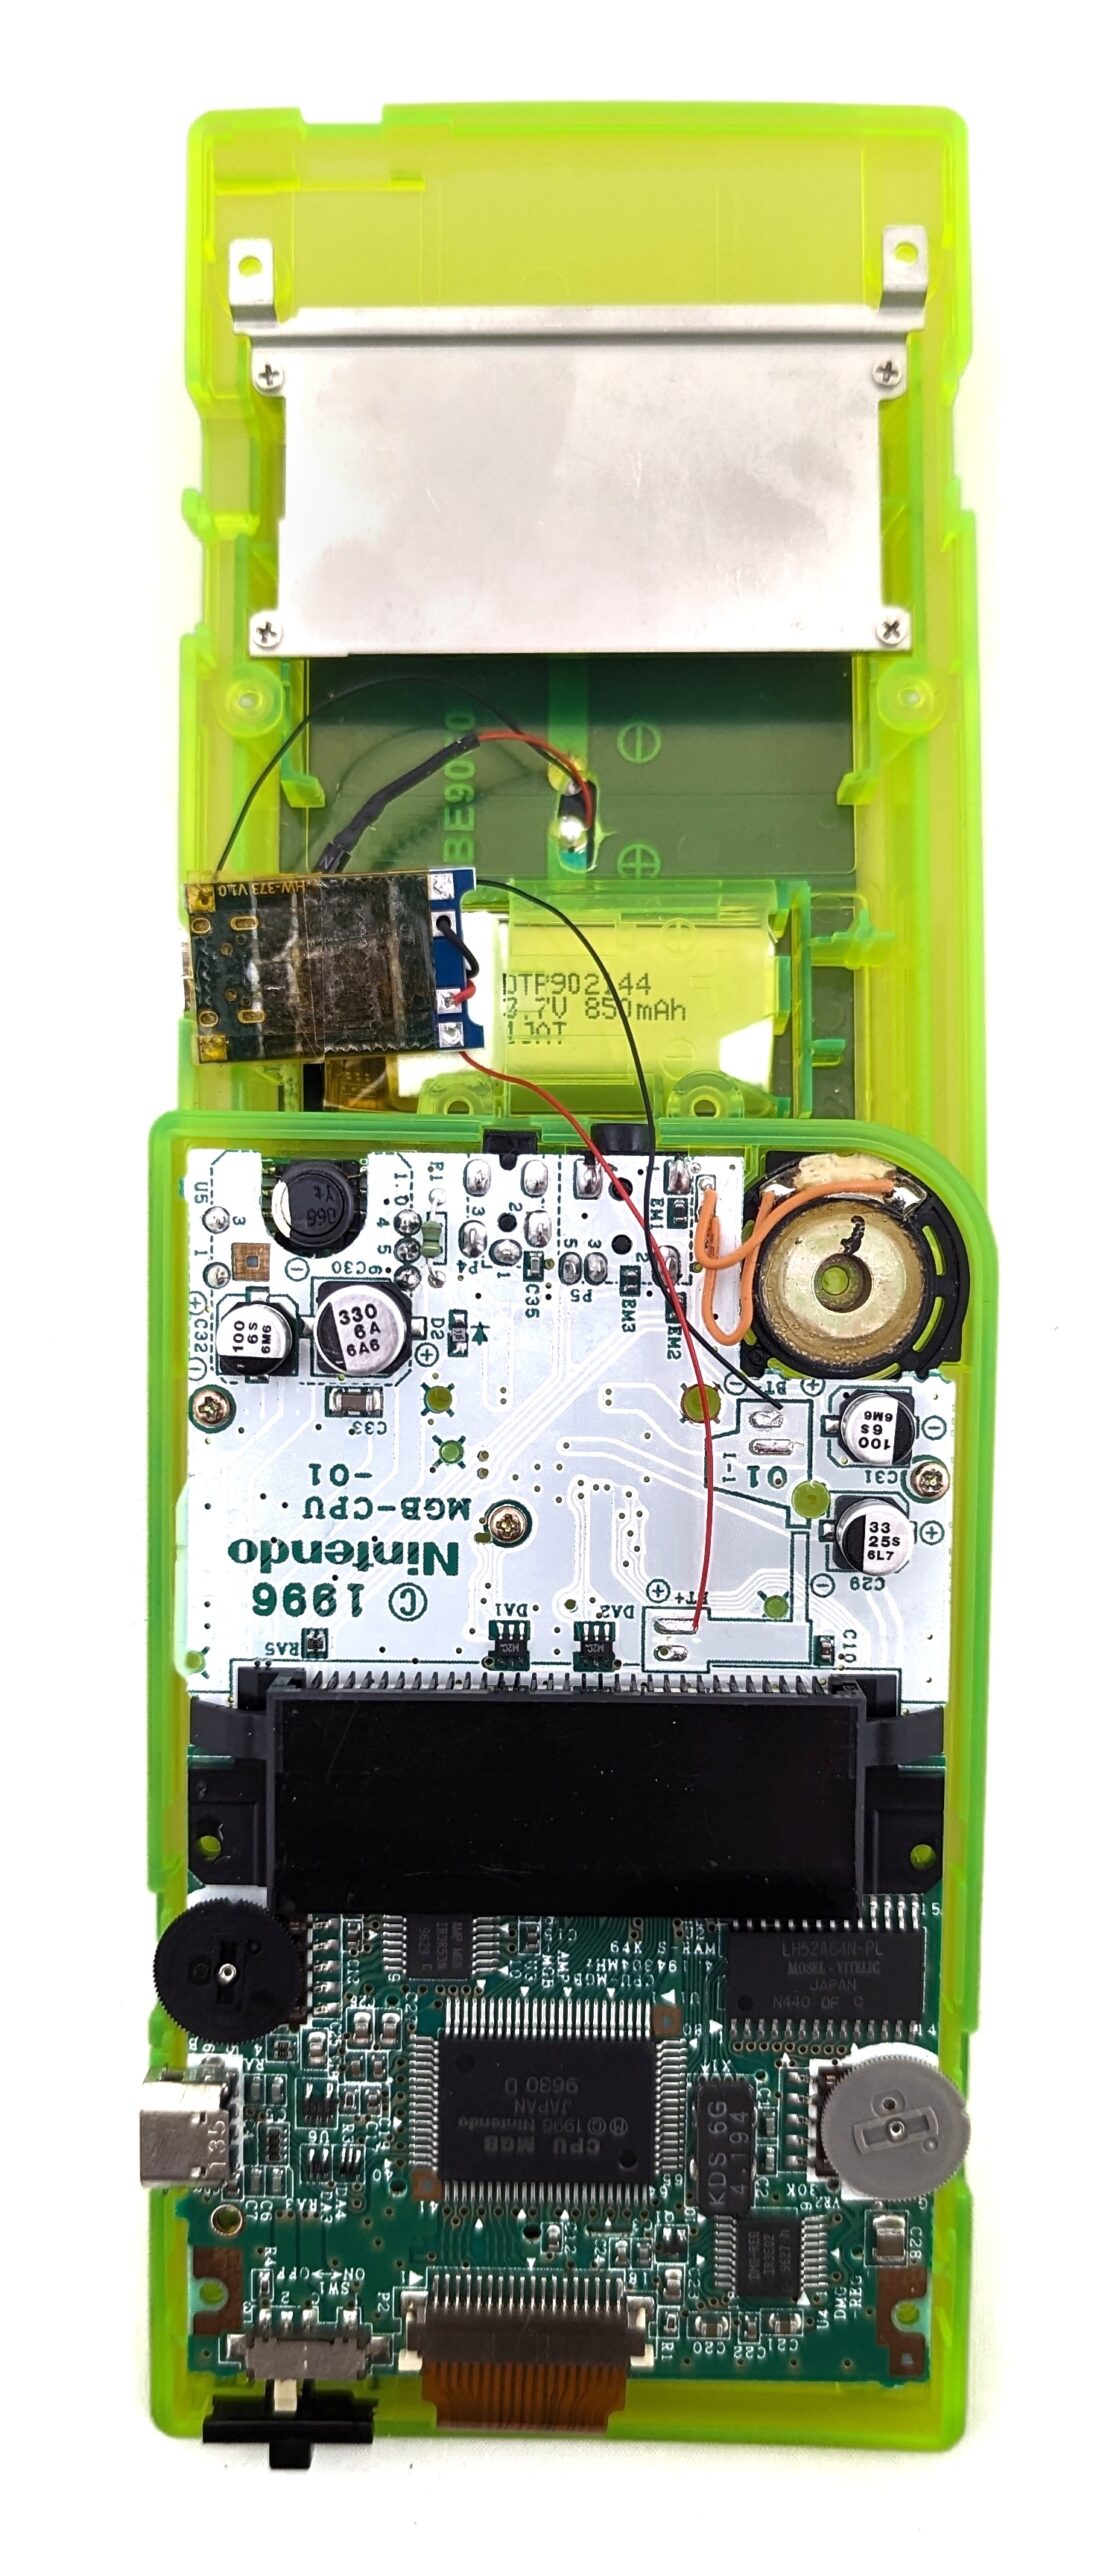 An open game boy pocket with the pcb exposed.